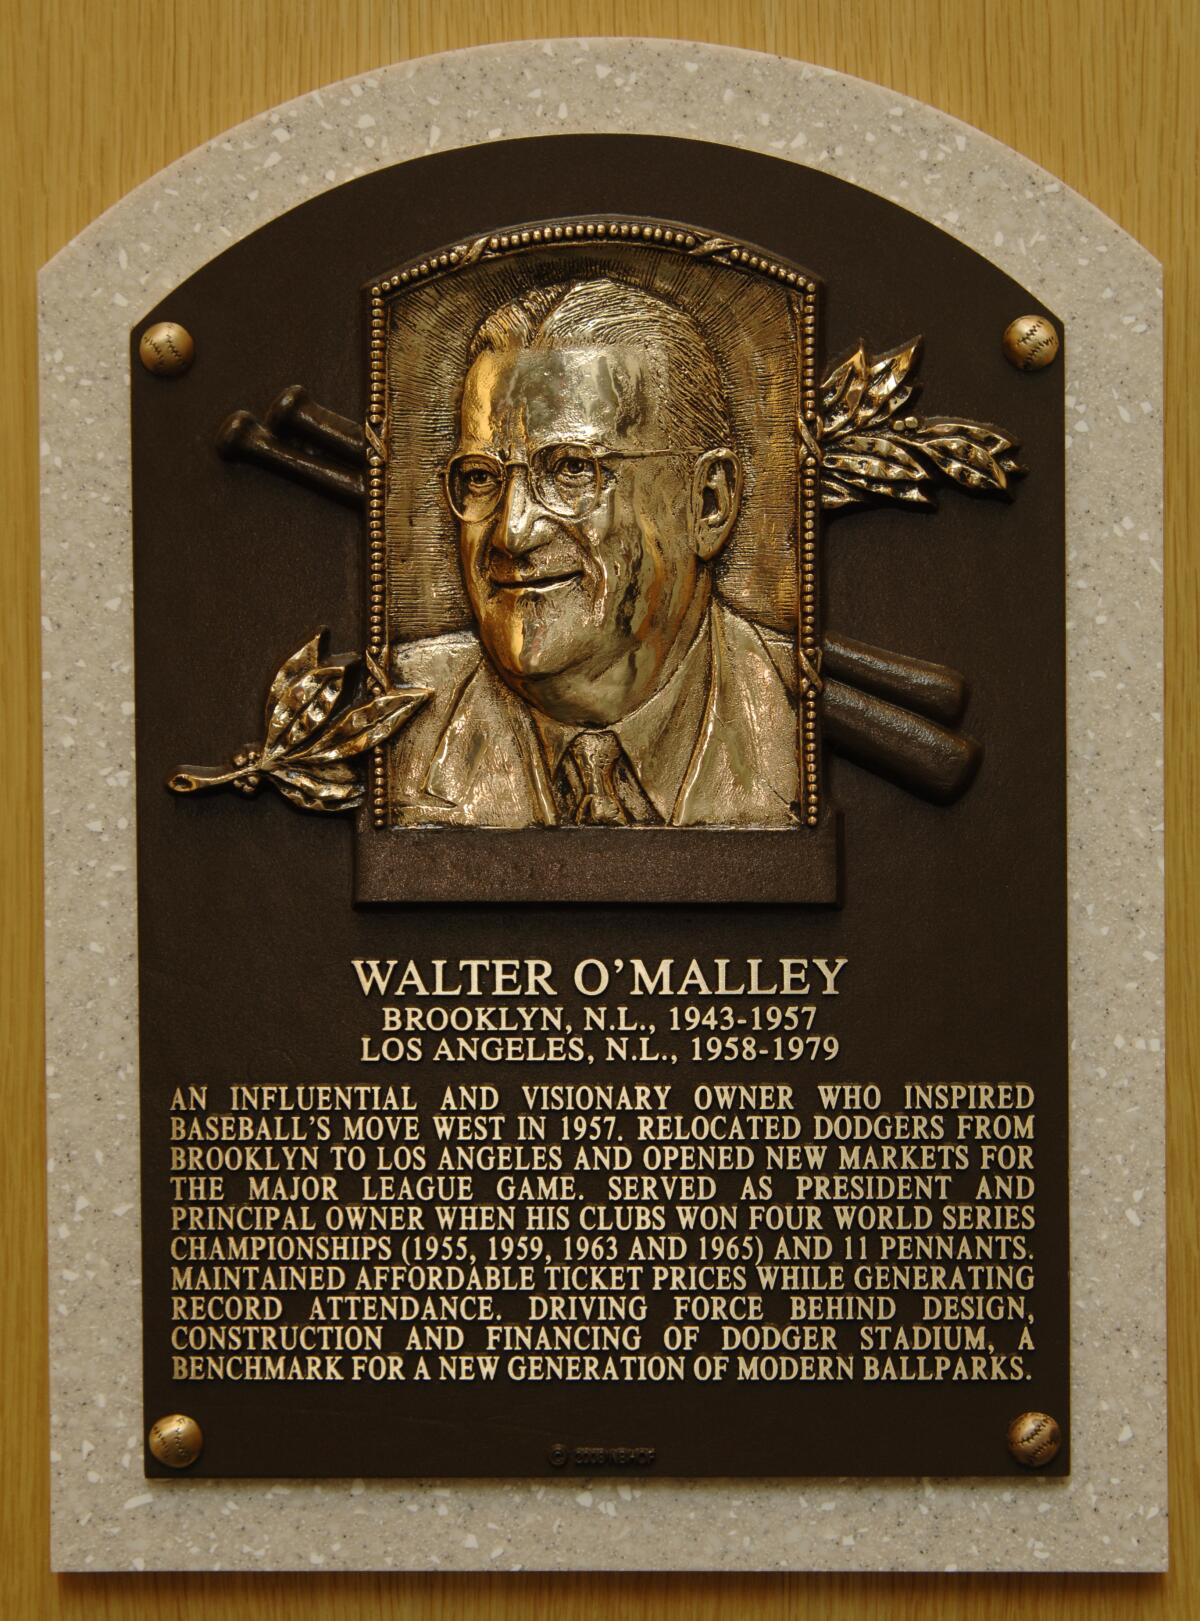 Walter O'Malley's plaque at the National Baseball Hall of Fame and Museum